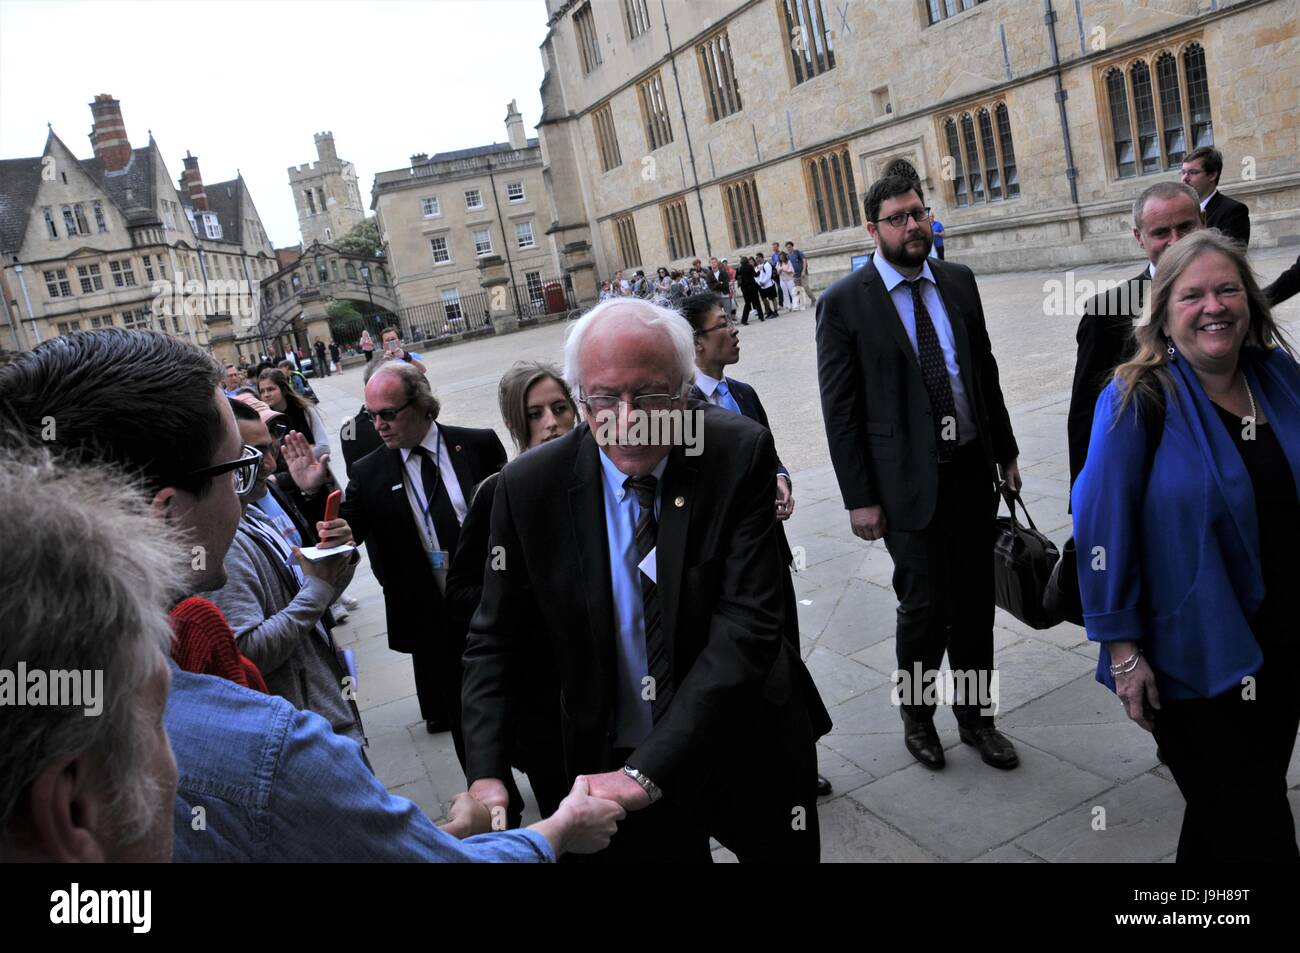 Oxford, Oxfordshire, UK. 2nd June, 2017. Bernie Sanders, former US Presidential Candidate, enters the Sheldonian in Oxford to speak about his best selling book, as part of the Hay Festival. Credit: Stanislav Halcin/Alamy Live News Stock Photo